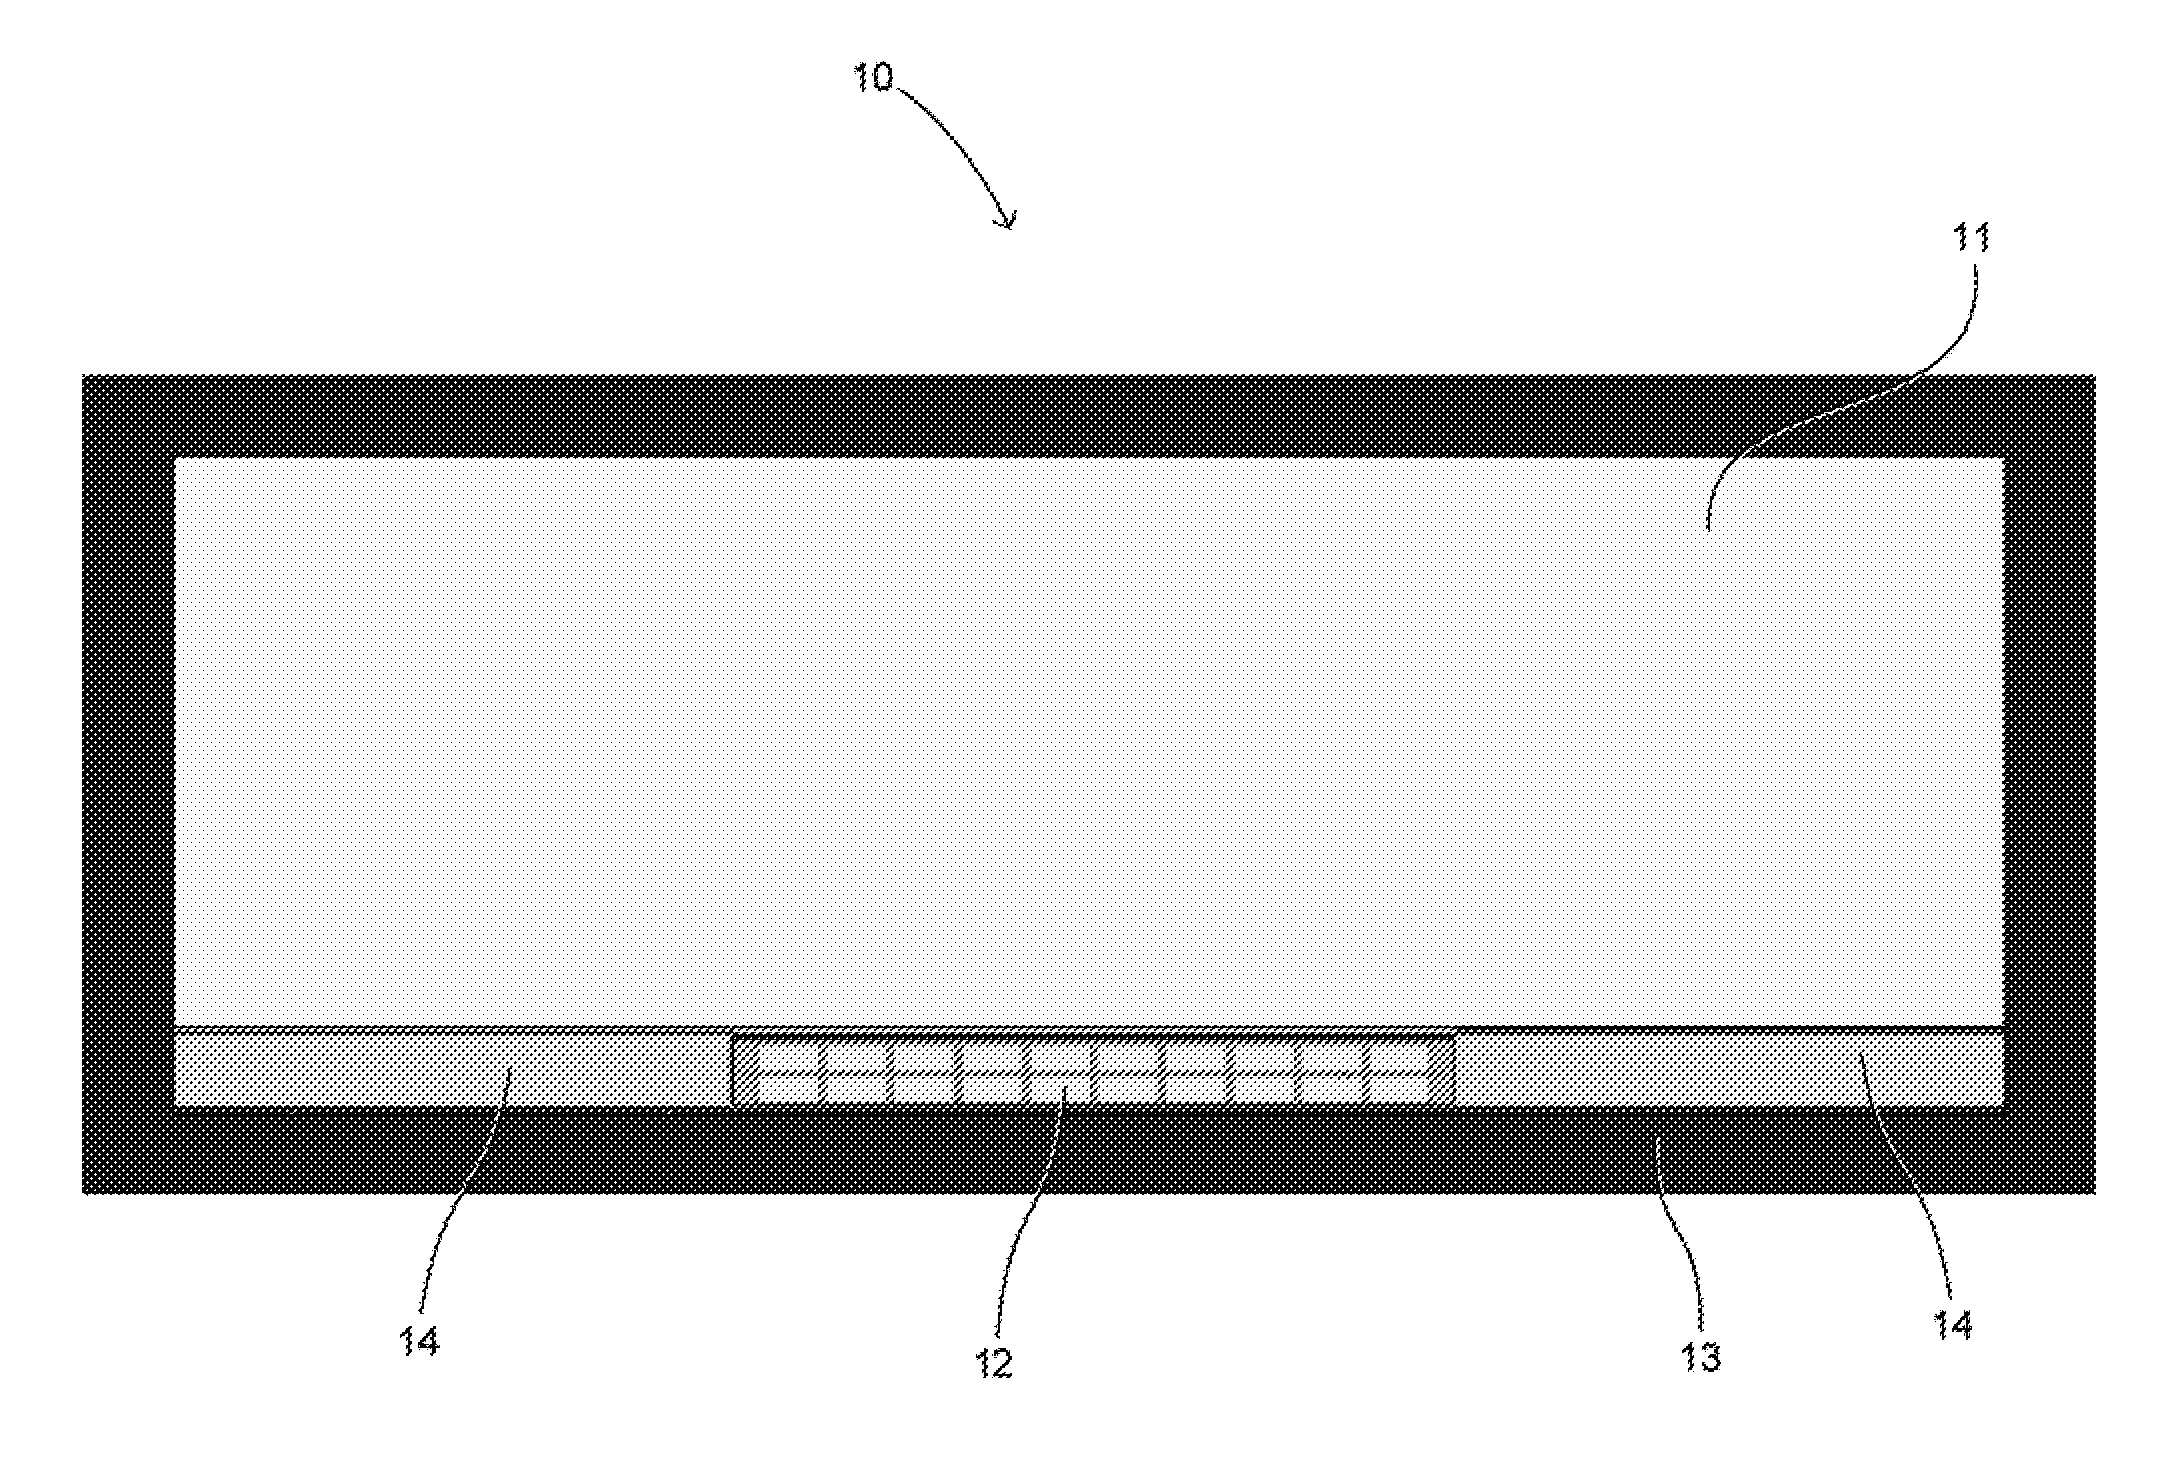 Method of Pre-Attaching Assemblies to an Electrochromic Glazing for Accurate Fit or Registration After Installation